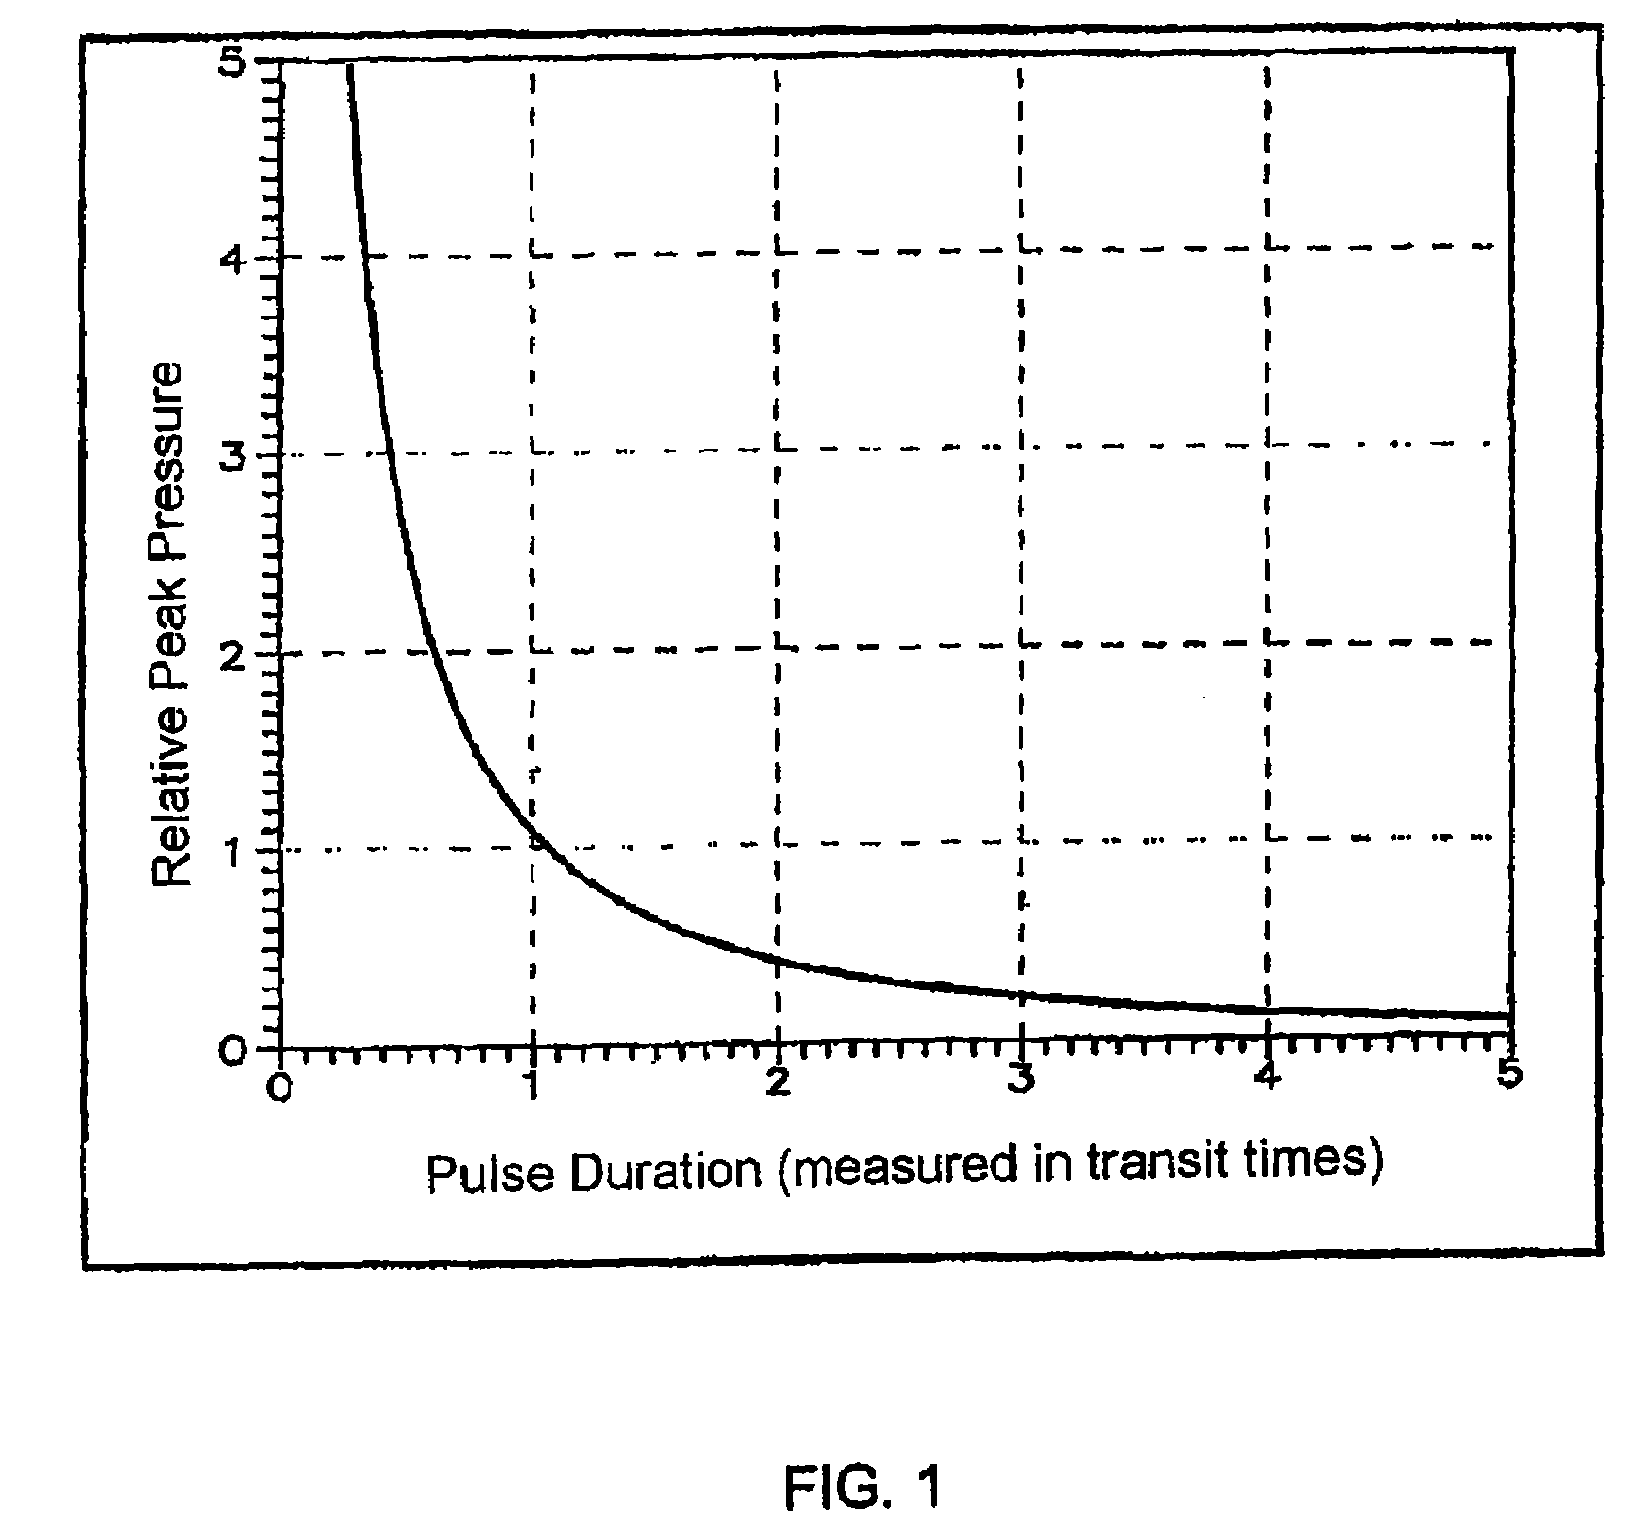 Picosecond laser apparatus and methods for its operation and use